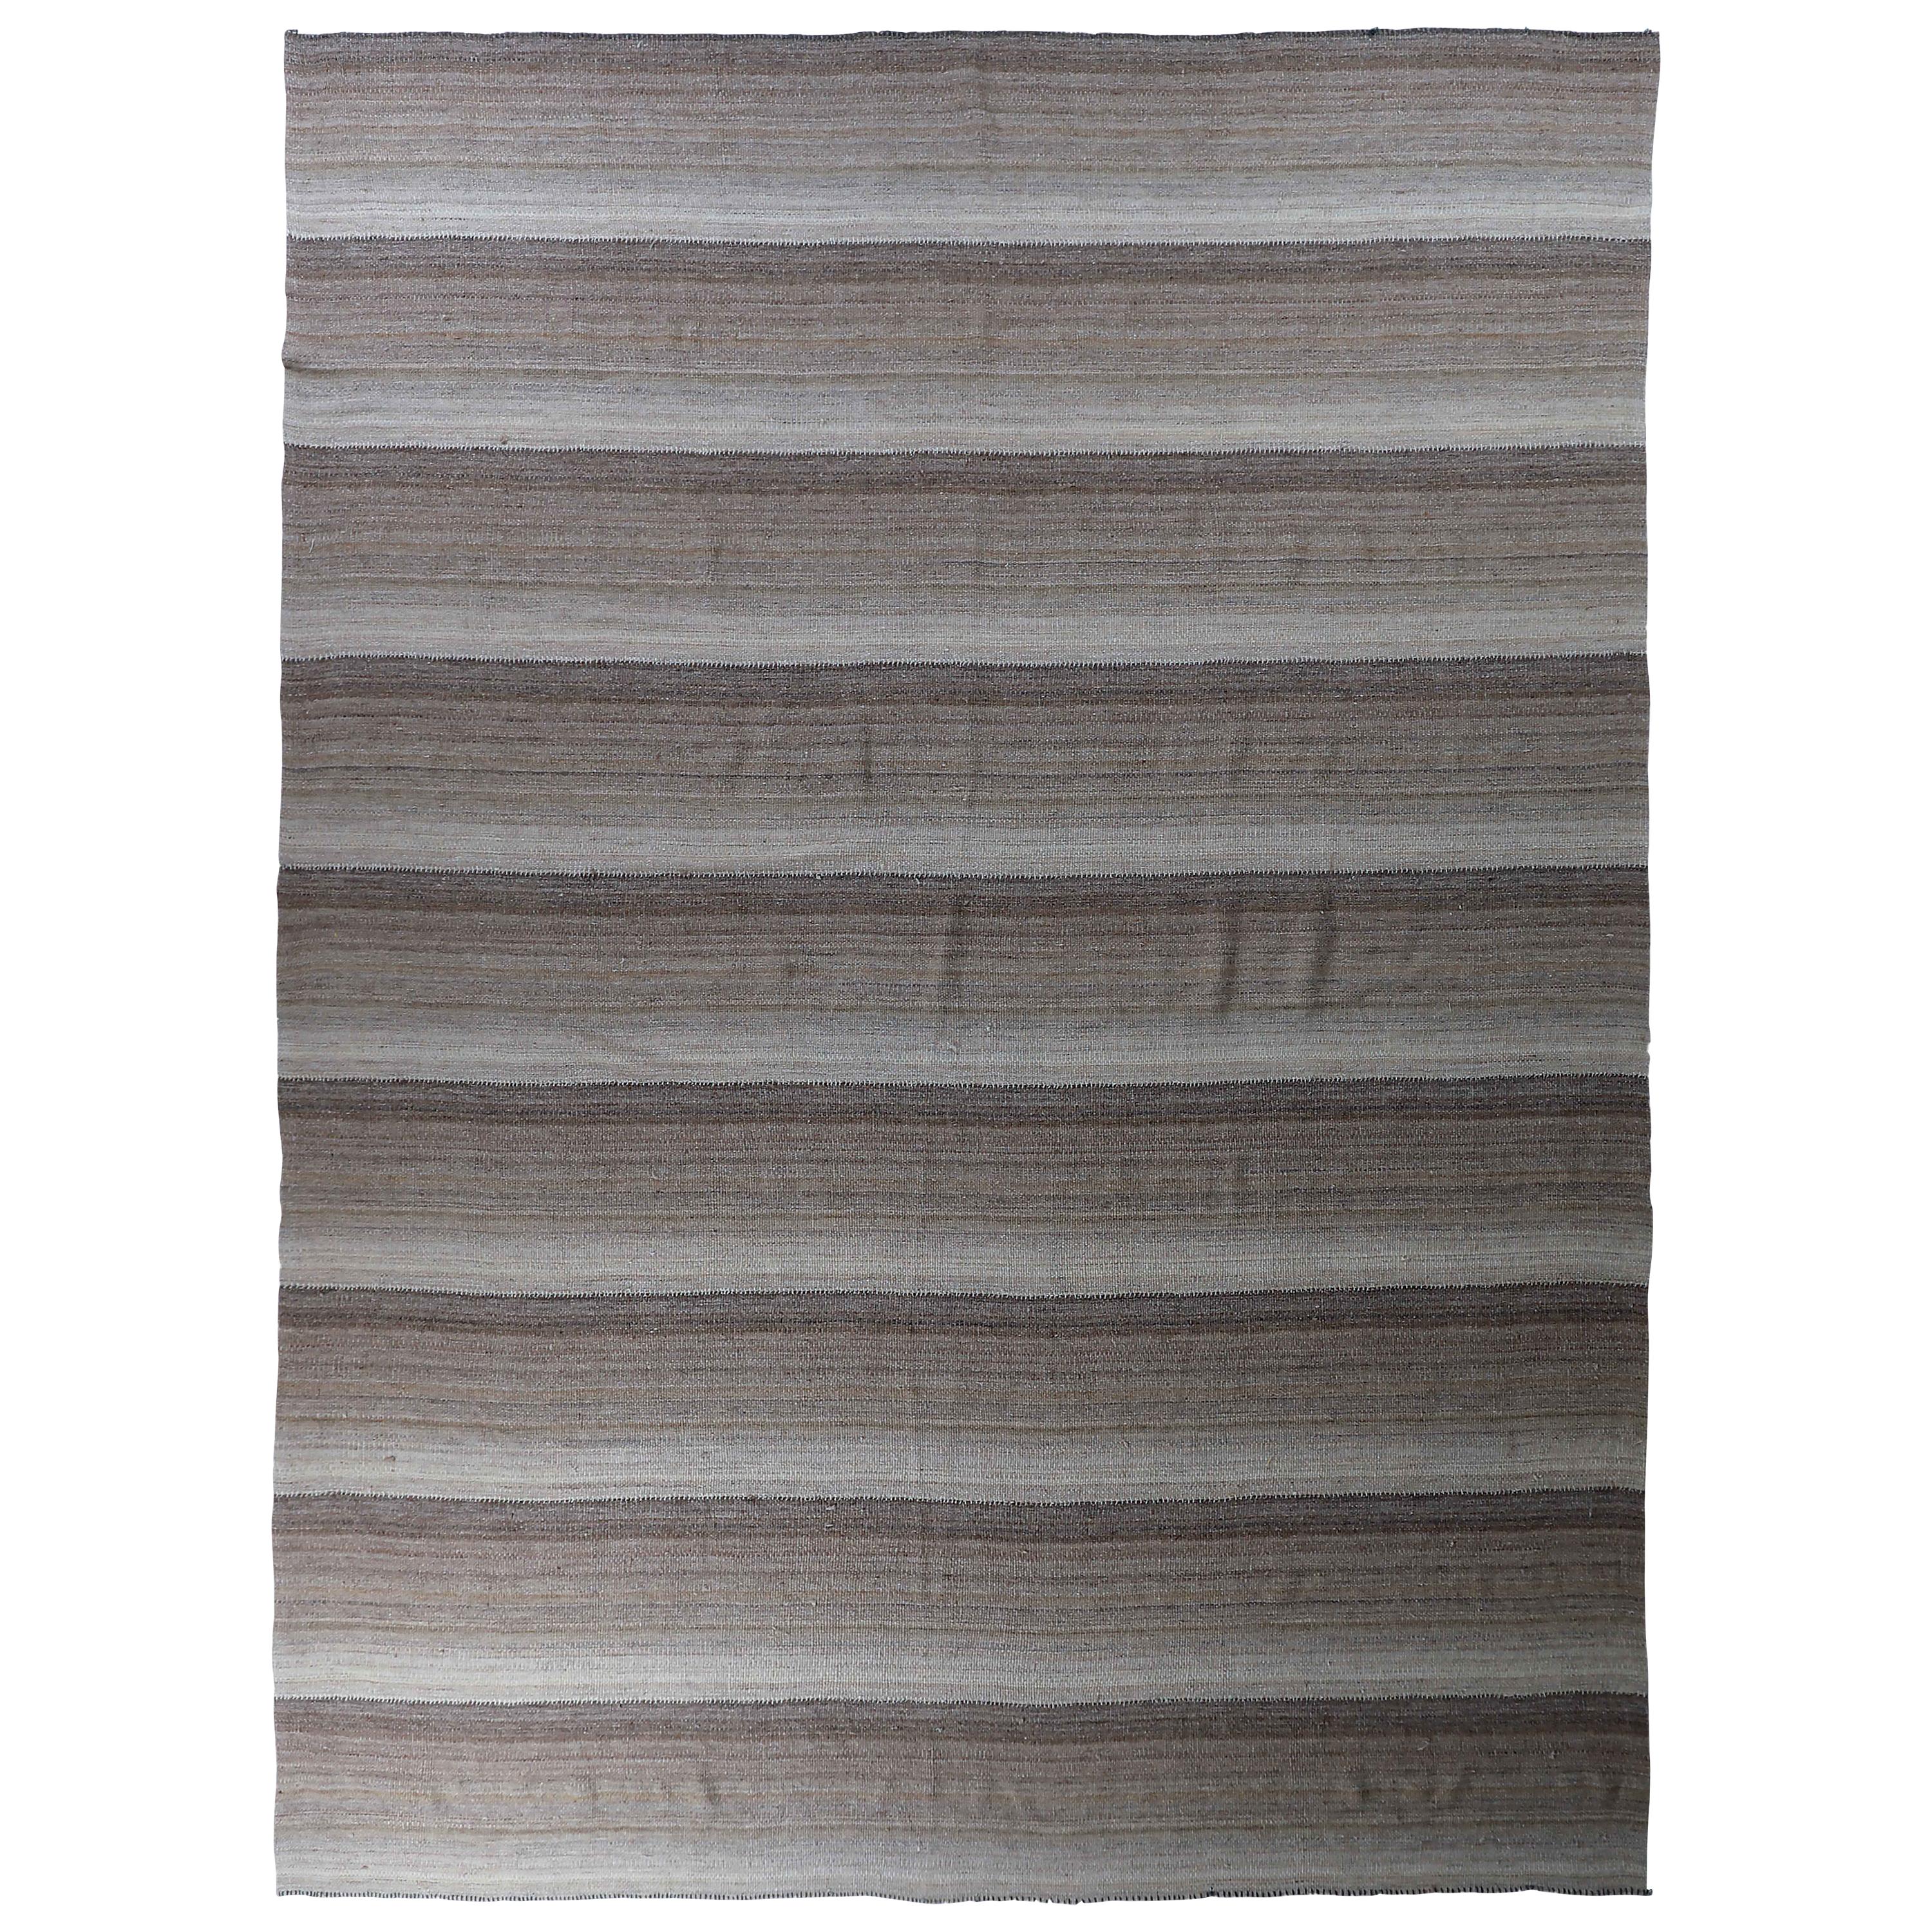 Modern Turkish Kilim Rug with Brown and Gray Stripes on Ivory Field